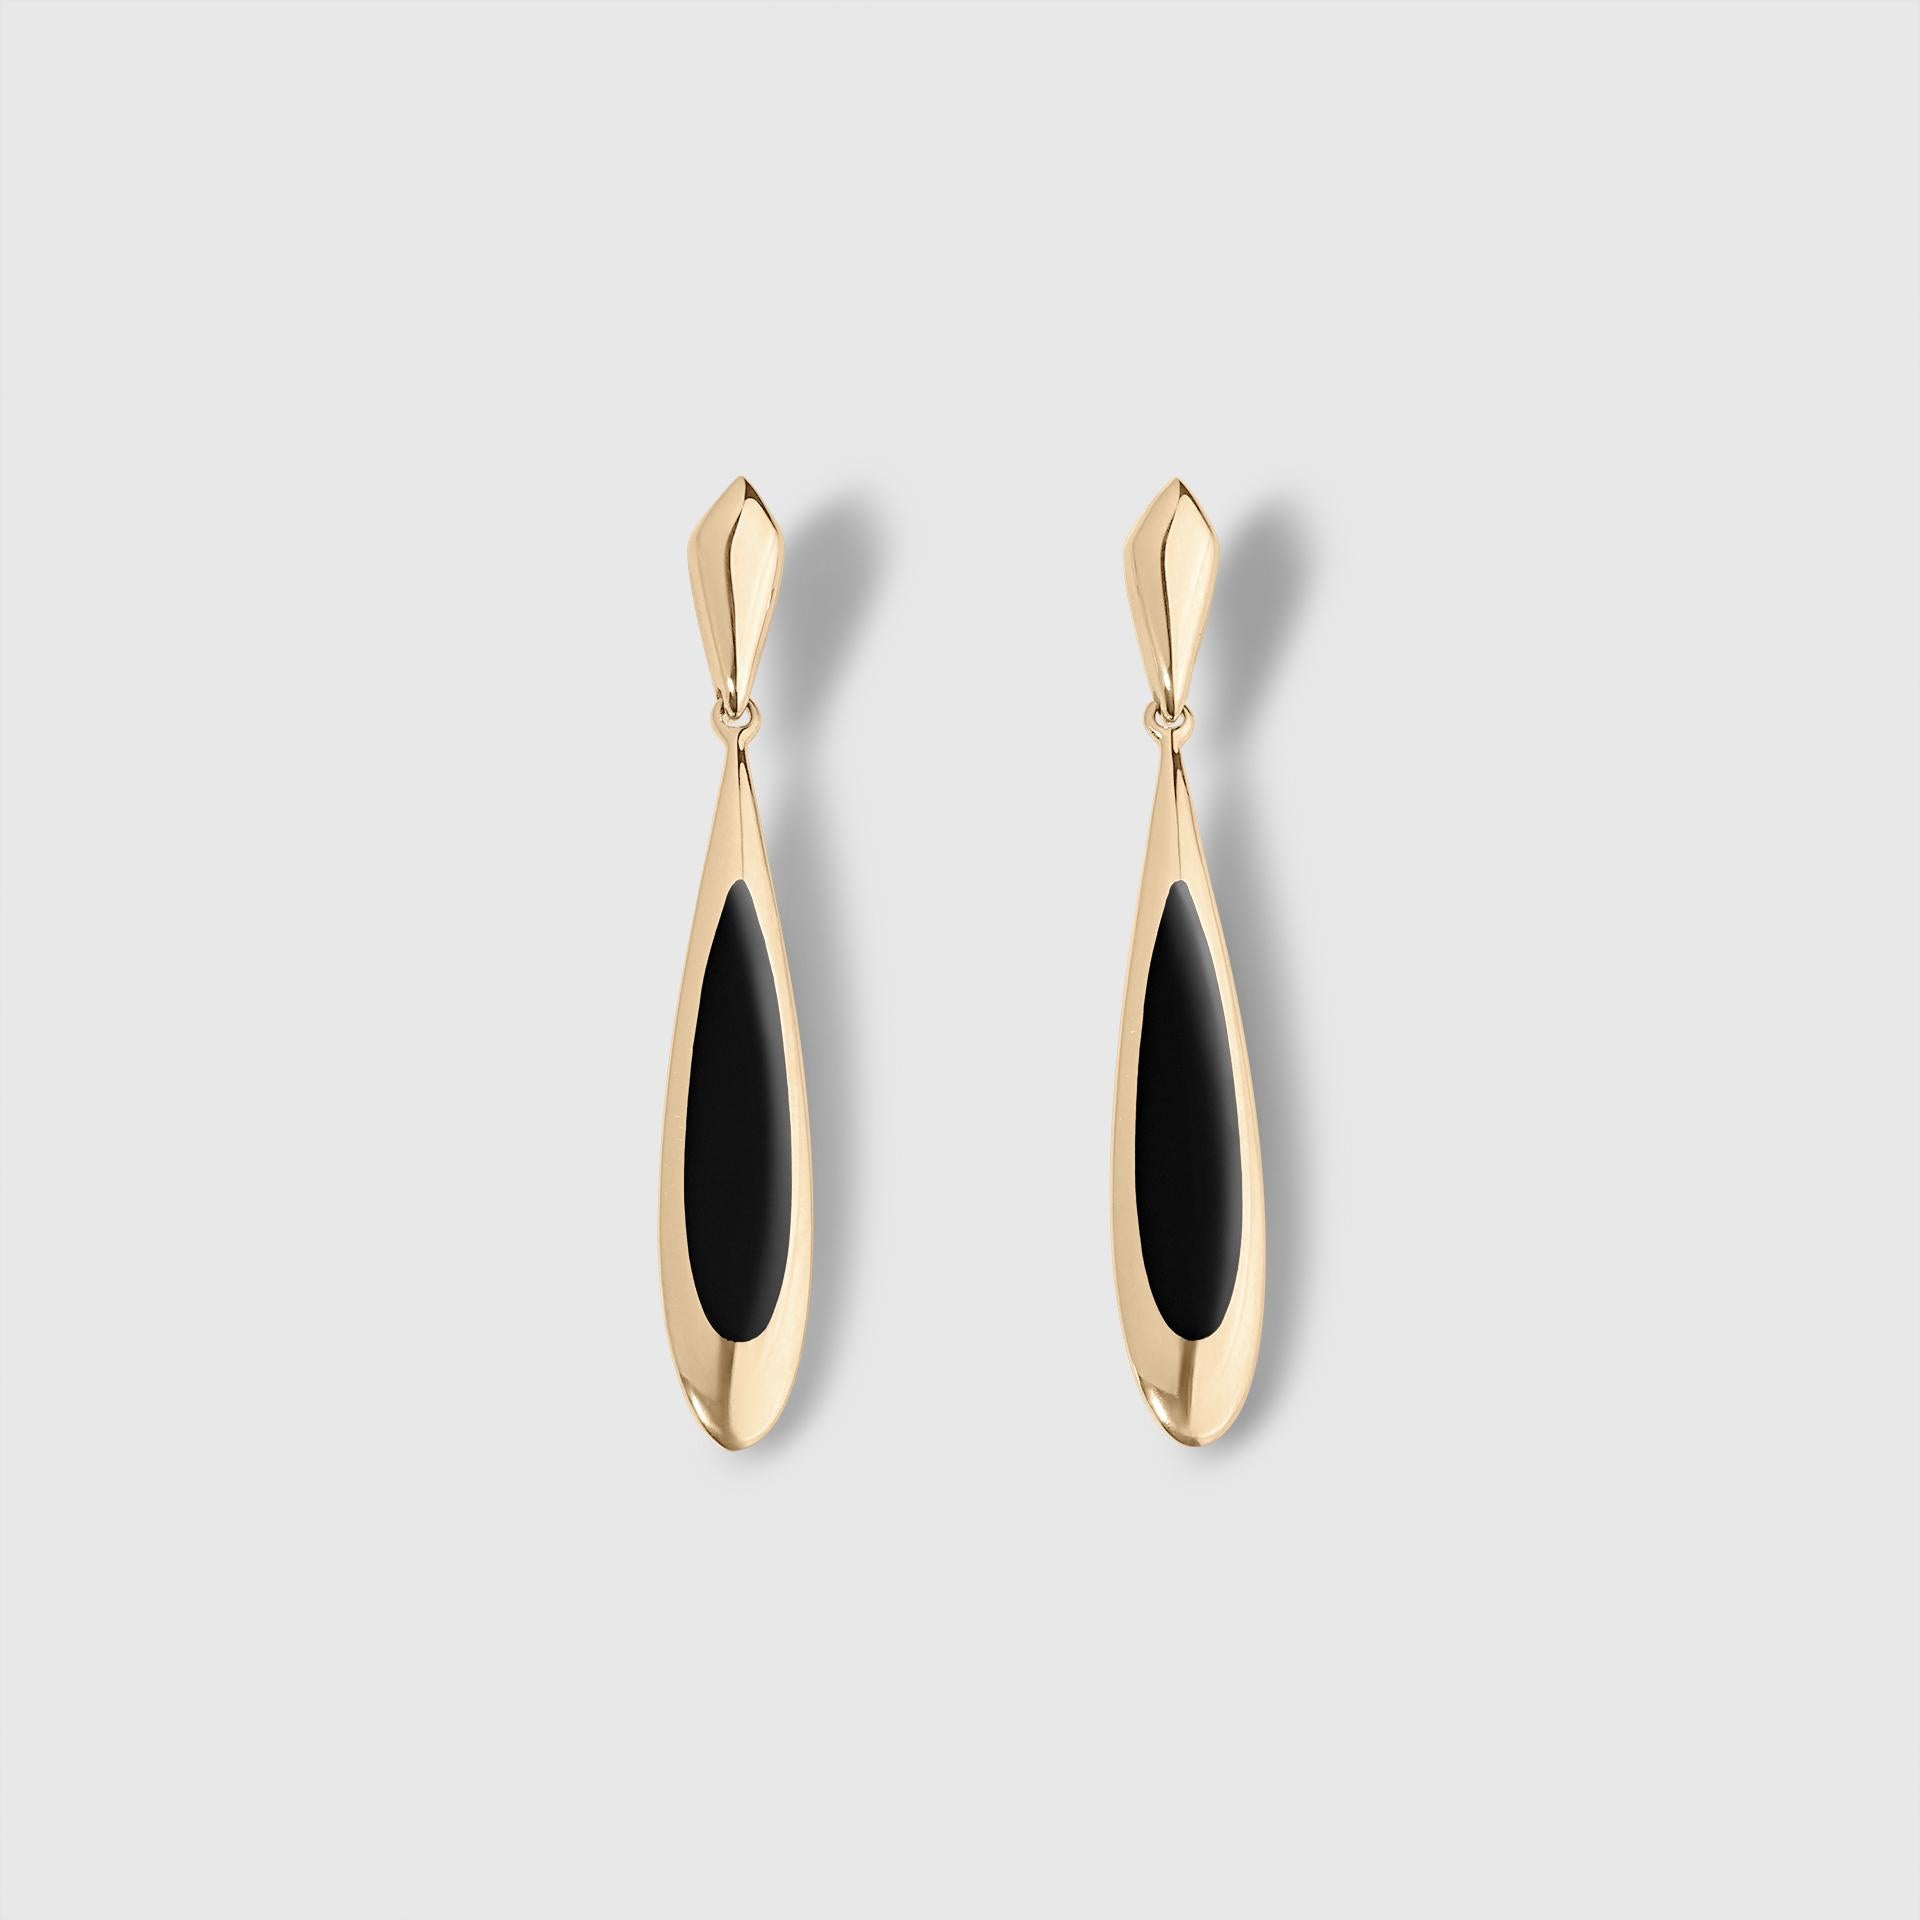 Long Tear-Drop Earrings with Black Onyx, 14kt Yellow Gold, 1 1/2 Inches in length

All designs may be custom-ordered in many of Kabana’s stones, including: sleeping beauty turquoise, turquoise, four-star opal, five-star-high-grade opal, black onyx,